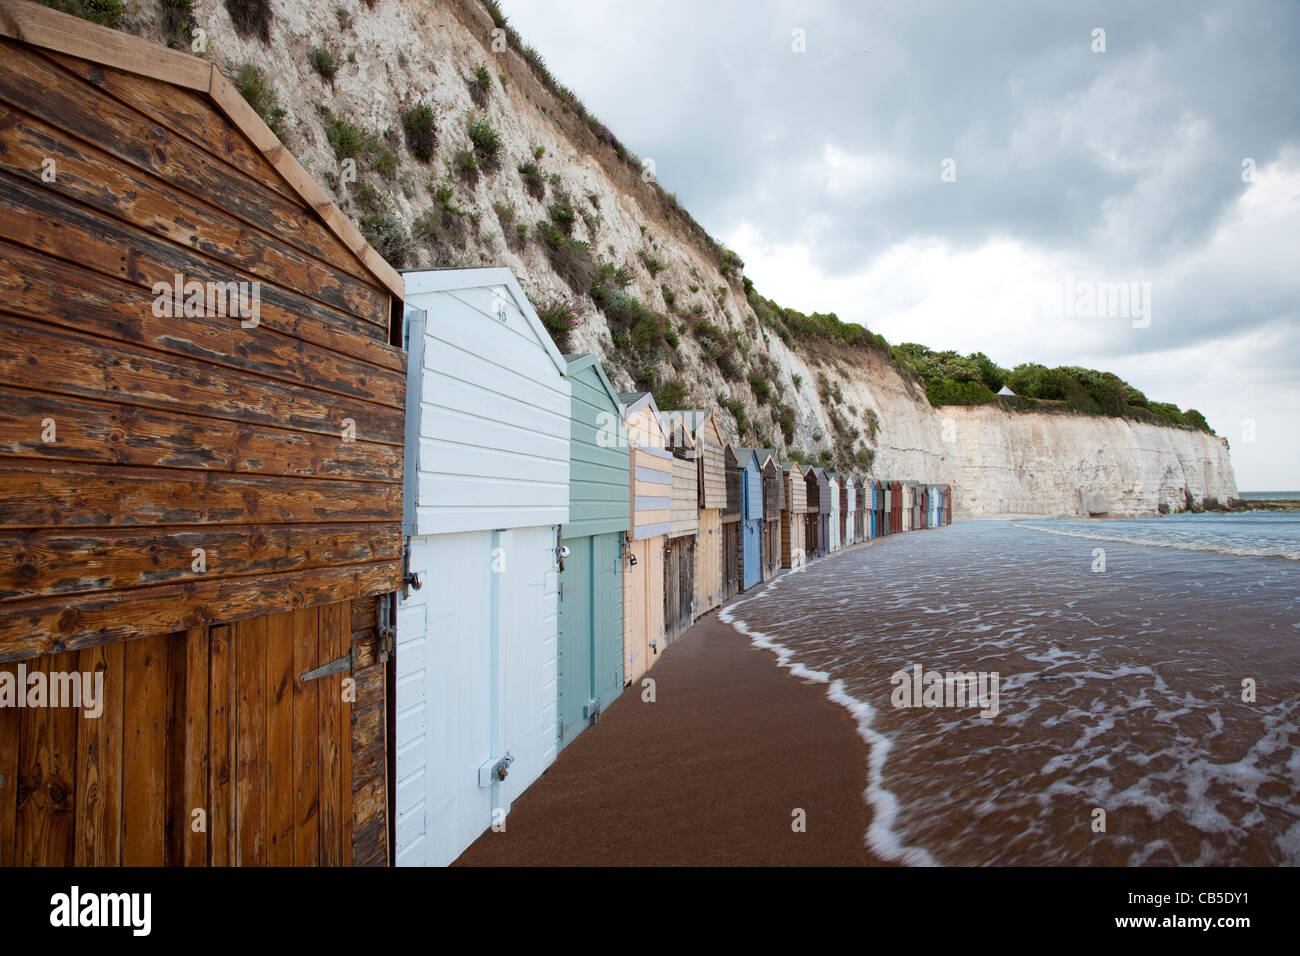 Beach huts in England with the tide approaching them. Stock Photo